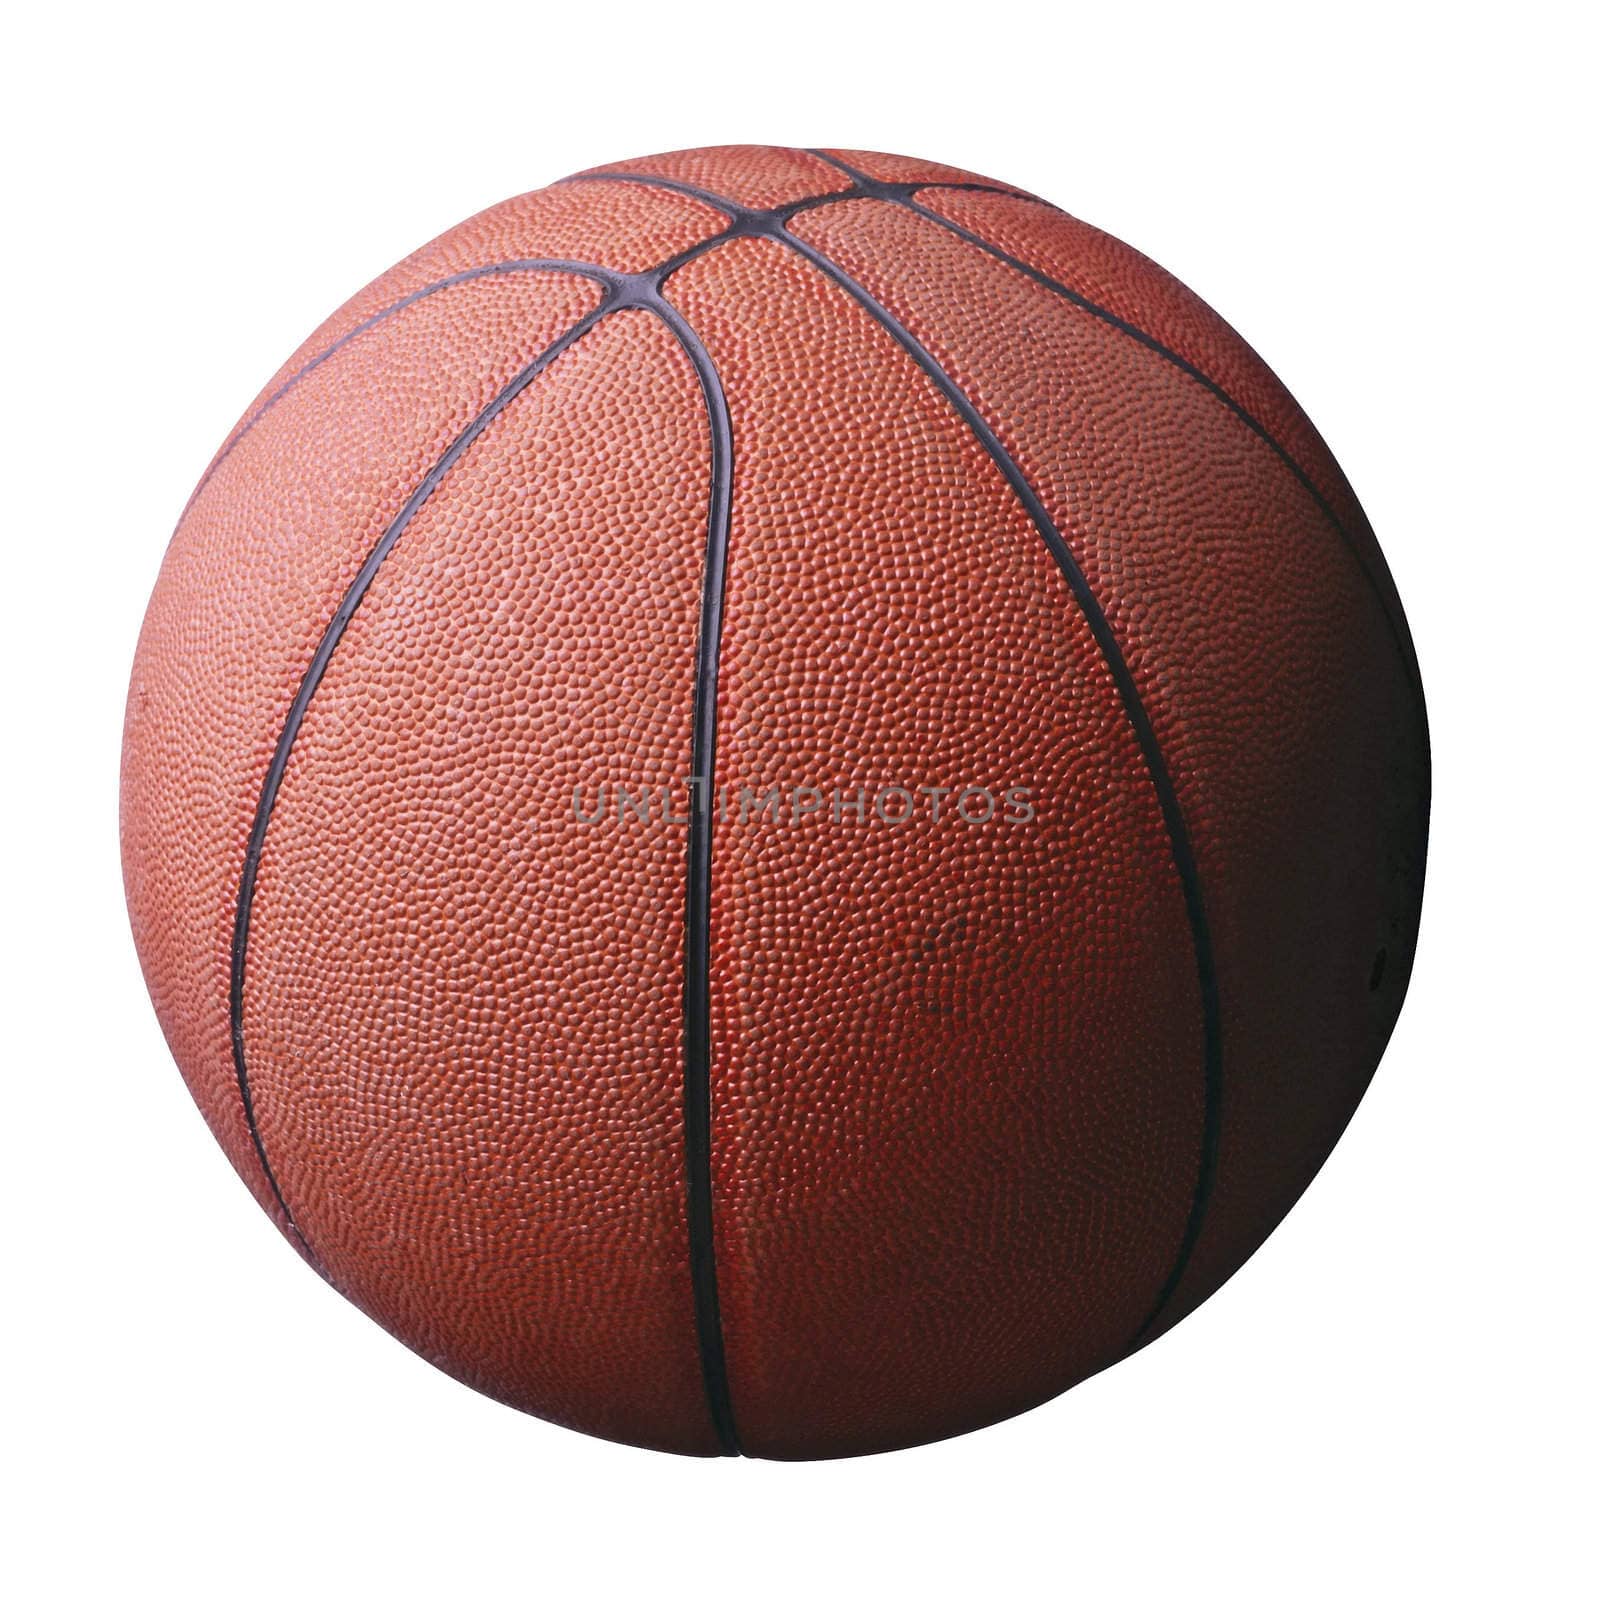 Basketball isolated - with white background